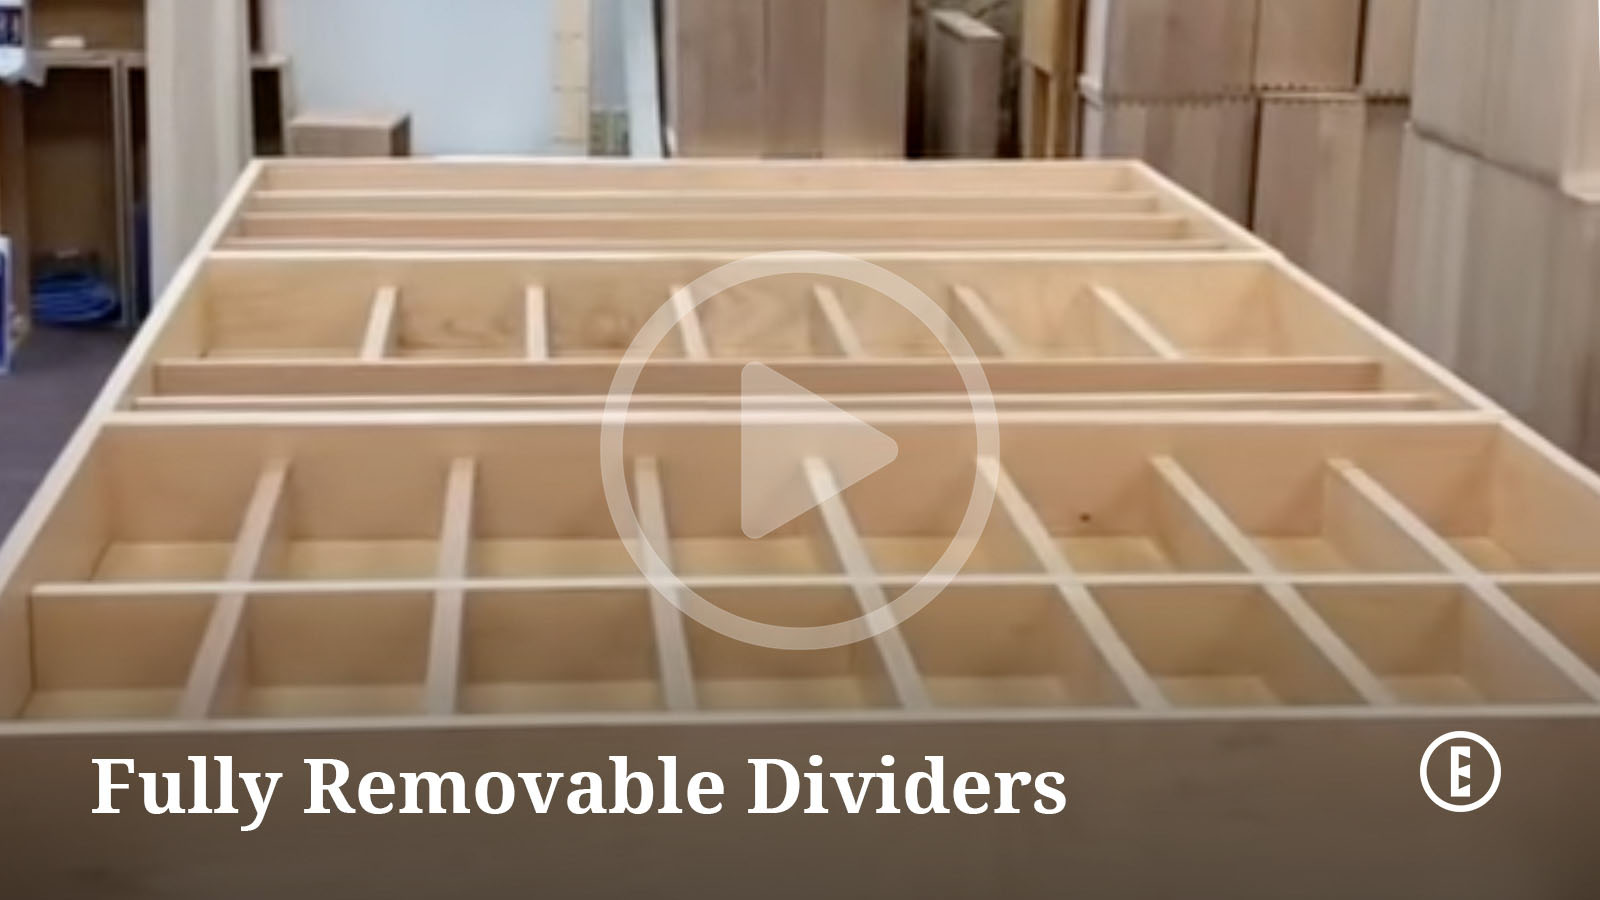 Video: Fully Removable Dividers